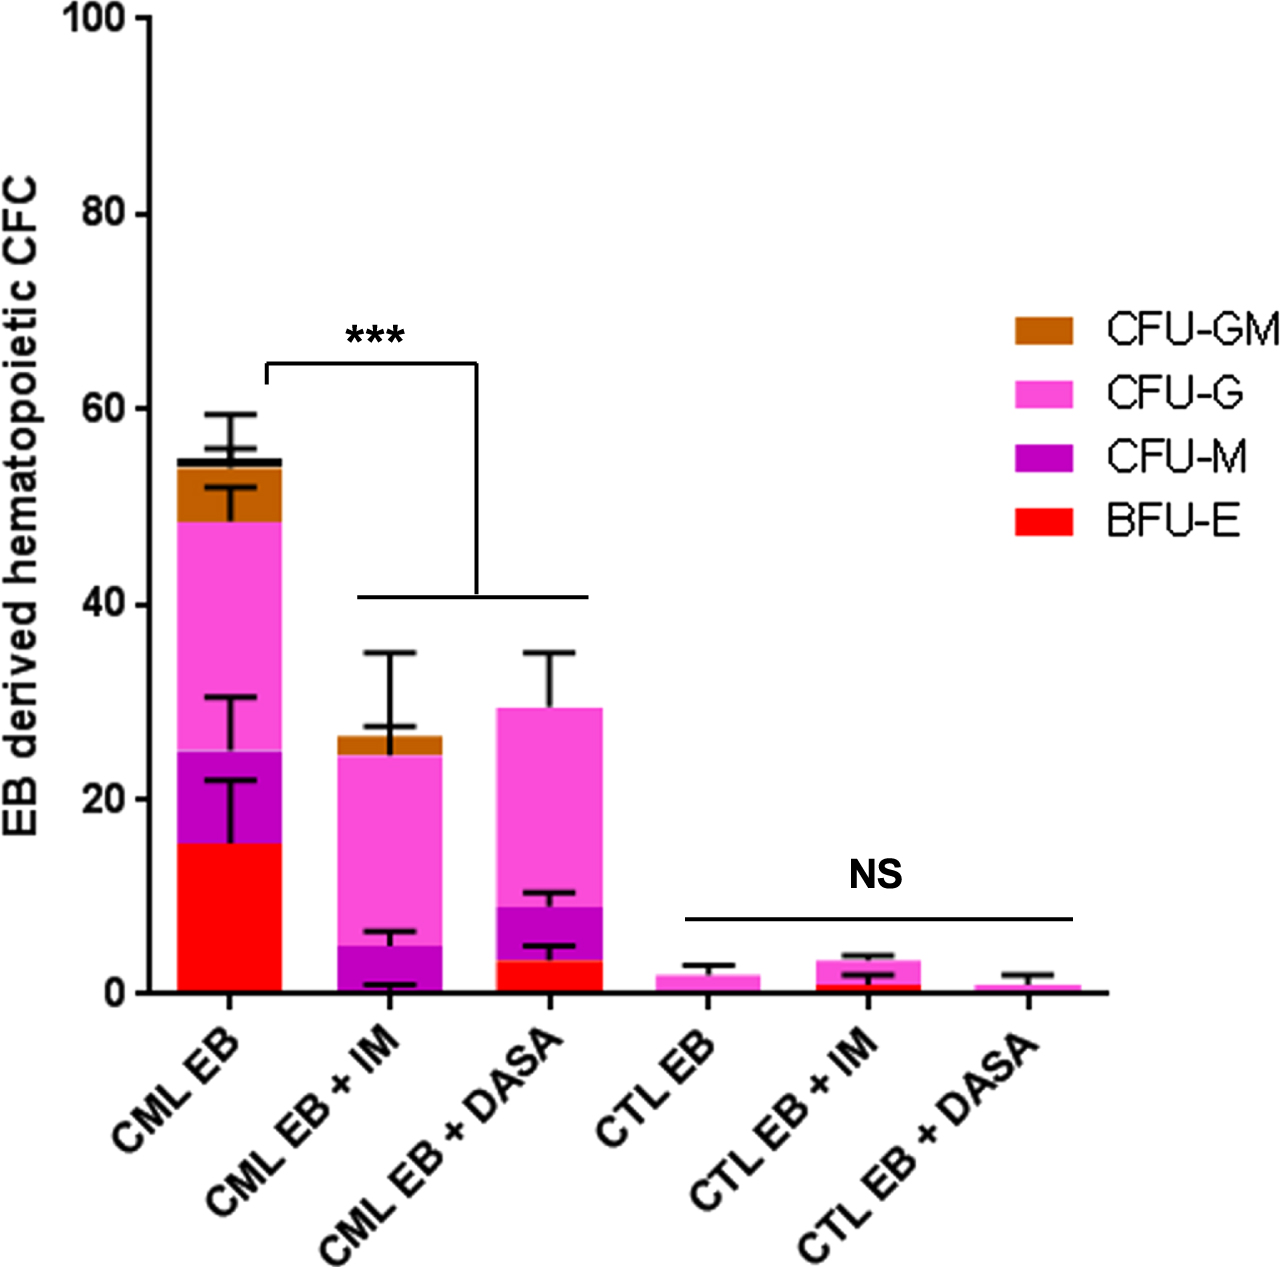 TKI sensitivity of PB32 CML iPSC and control hIPSC-derived hematopoietic cells. Hematopoietic cell colonies (CFC) counts from CML and EB derived from control hIPSC (PB33) in the presence or in the absence of 1μM Imatinib or 5nM Dasatinib. NS: Not significant.